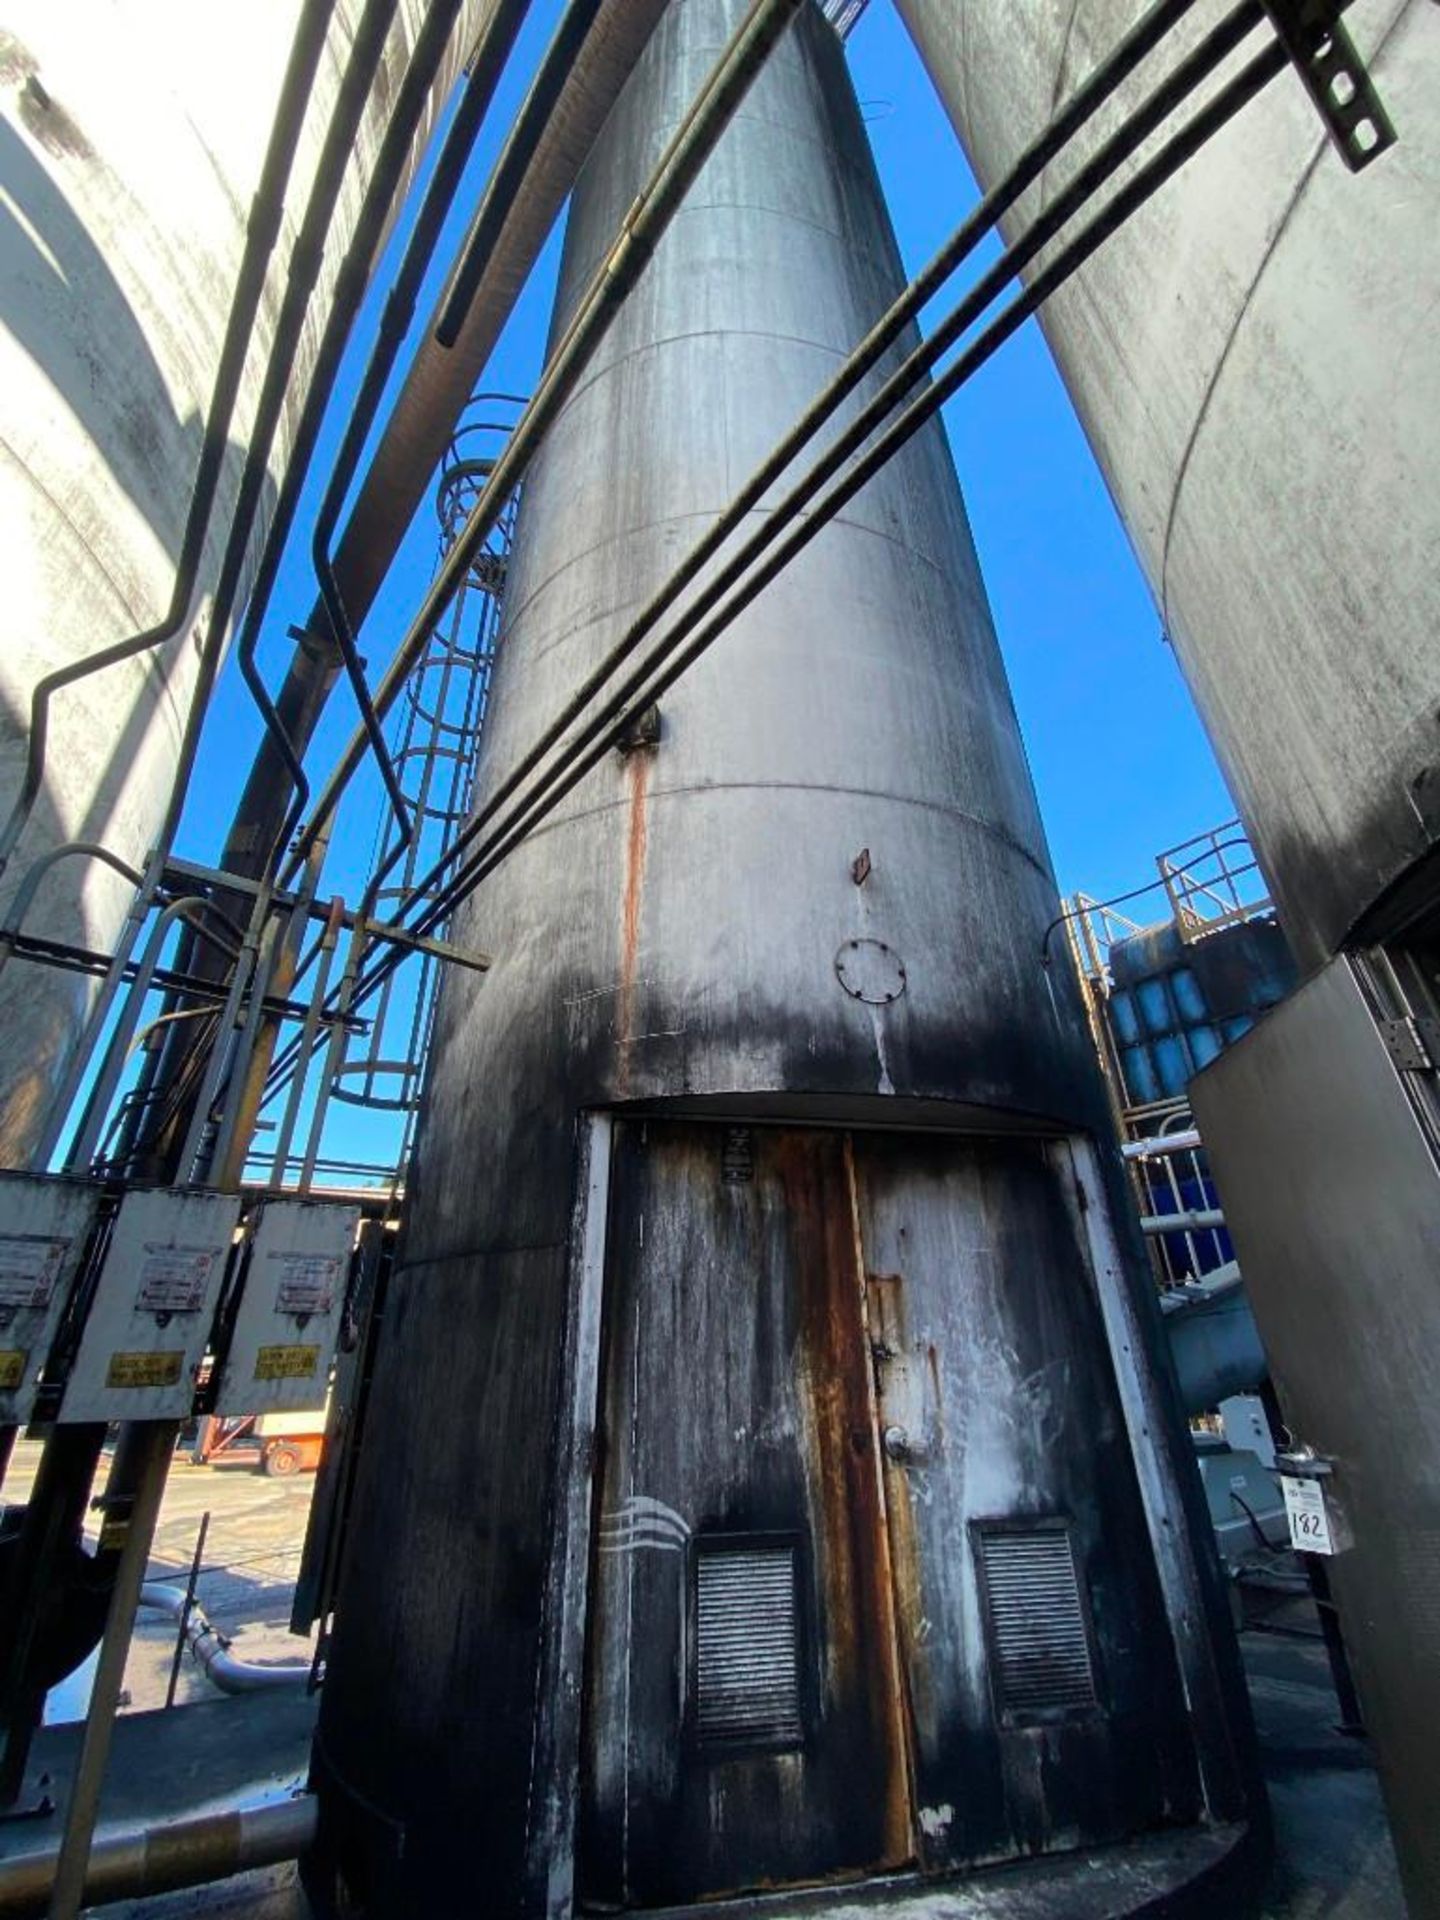 PEABODY 4,460 CUBIC FT. SILO; APPROX 53'H X 12'D W/ ROTARY AIR LOCK